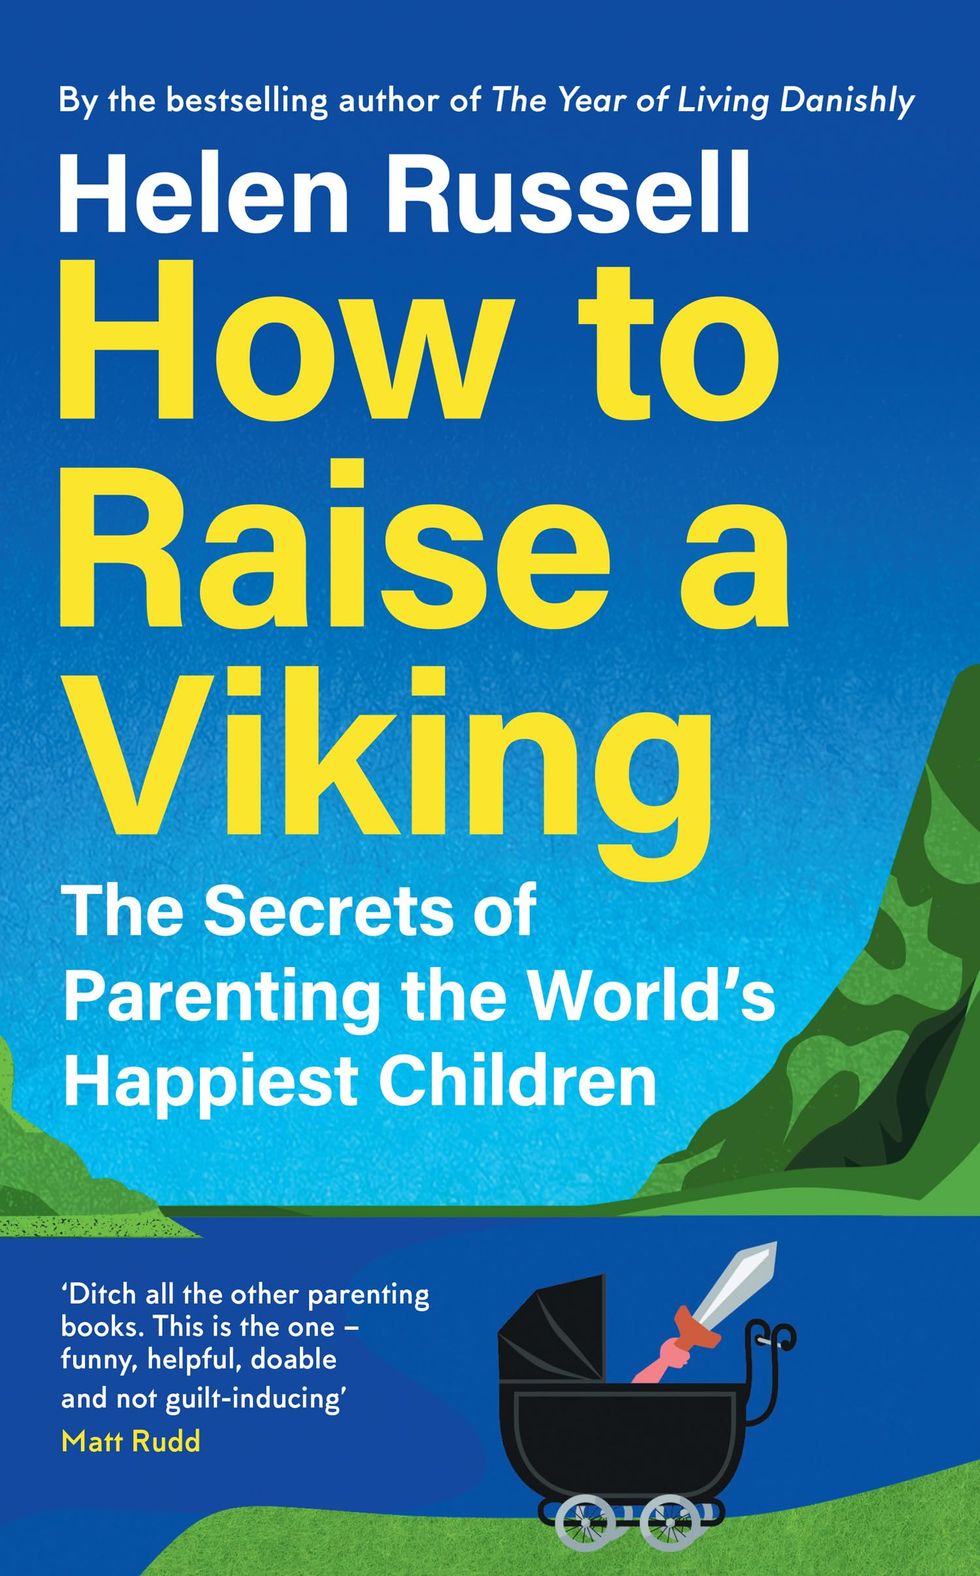 How to Raise a Viking: The Secrets of Parenting the World’s Happiest Children by Helen Russell